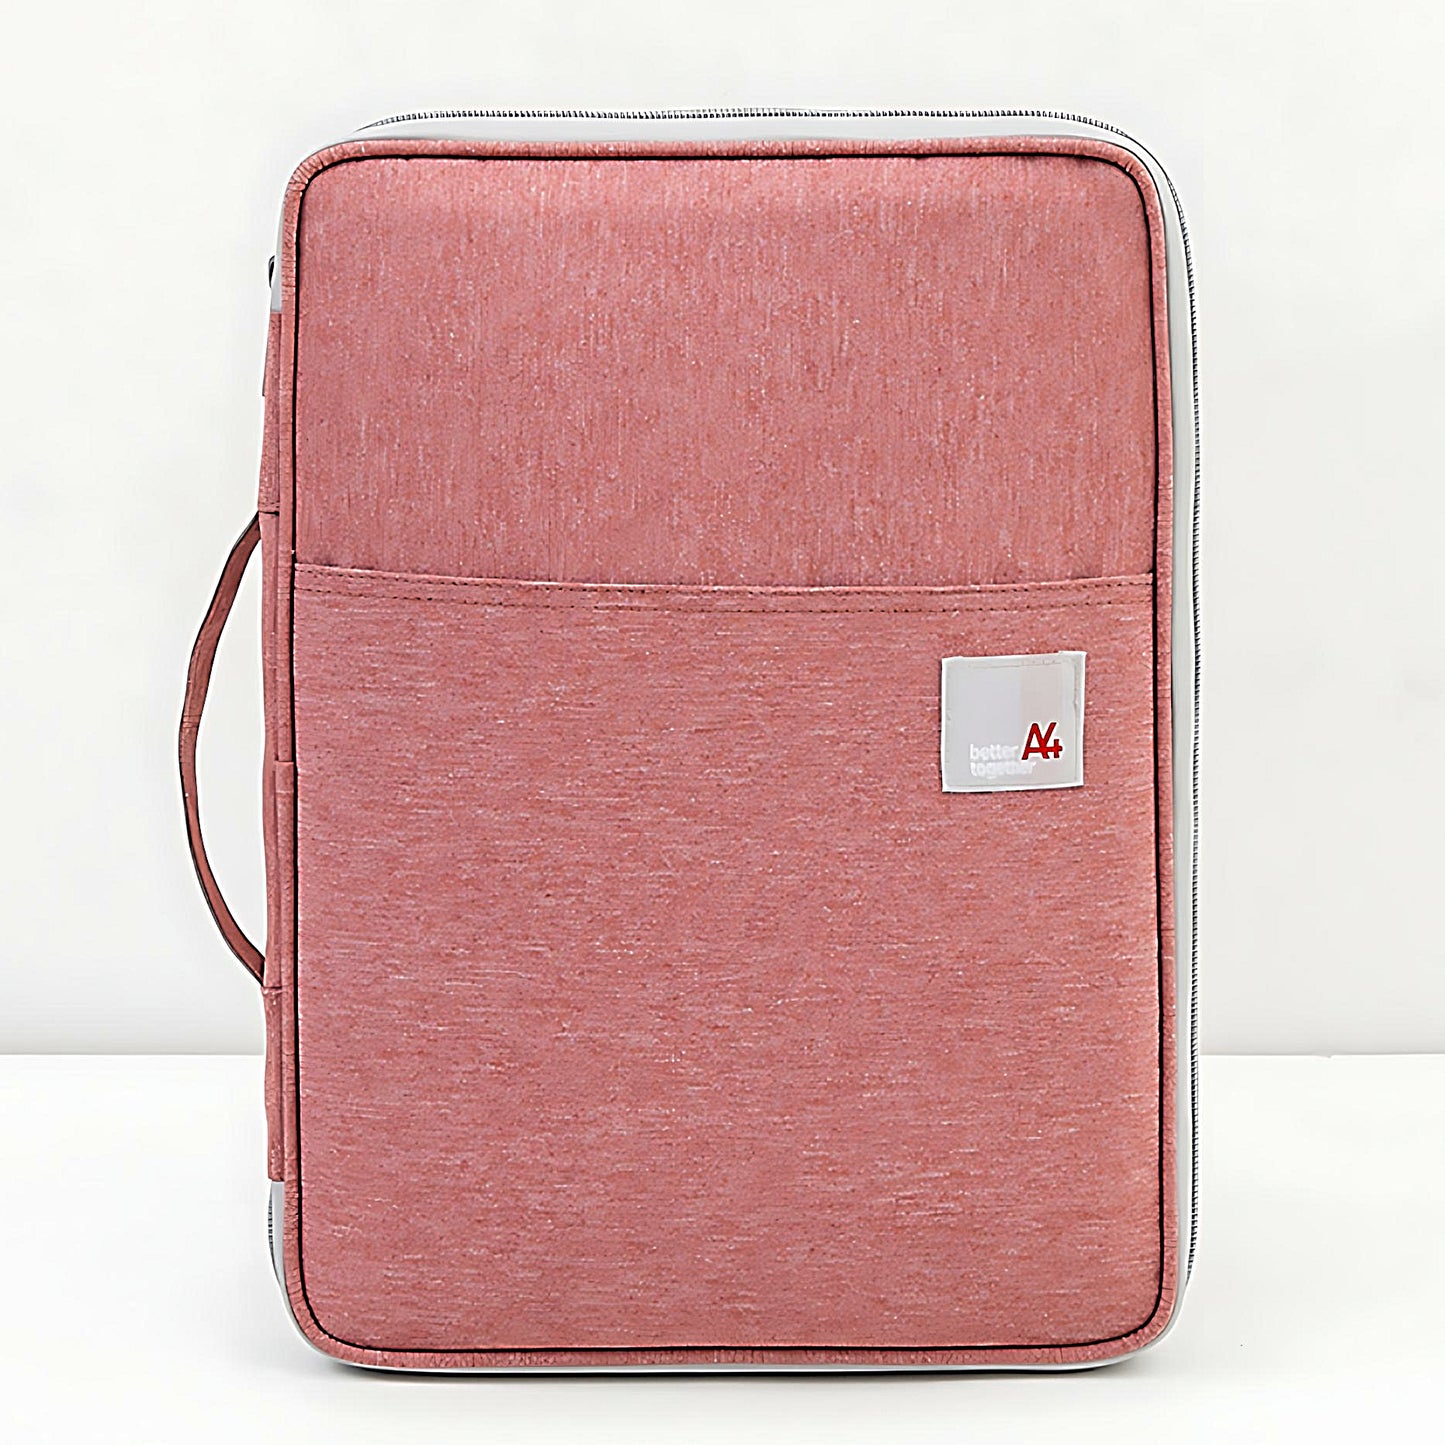 a laptop briefcase in red color on a white background